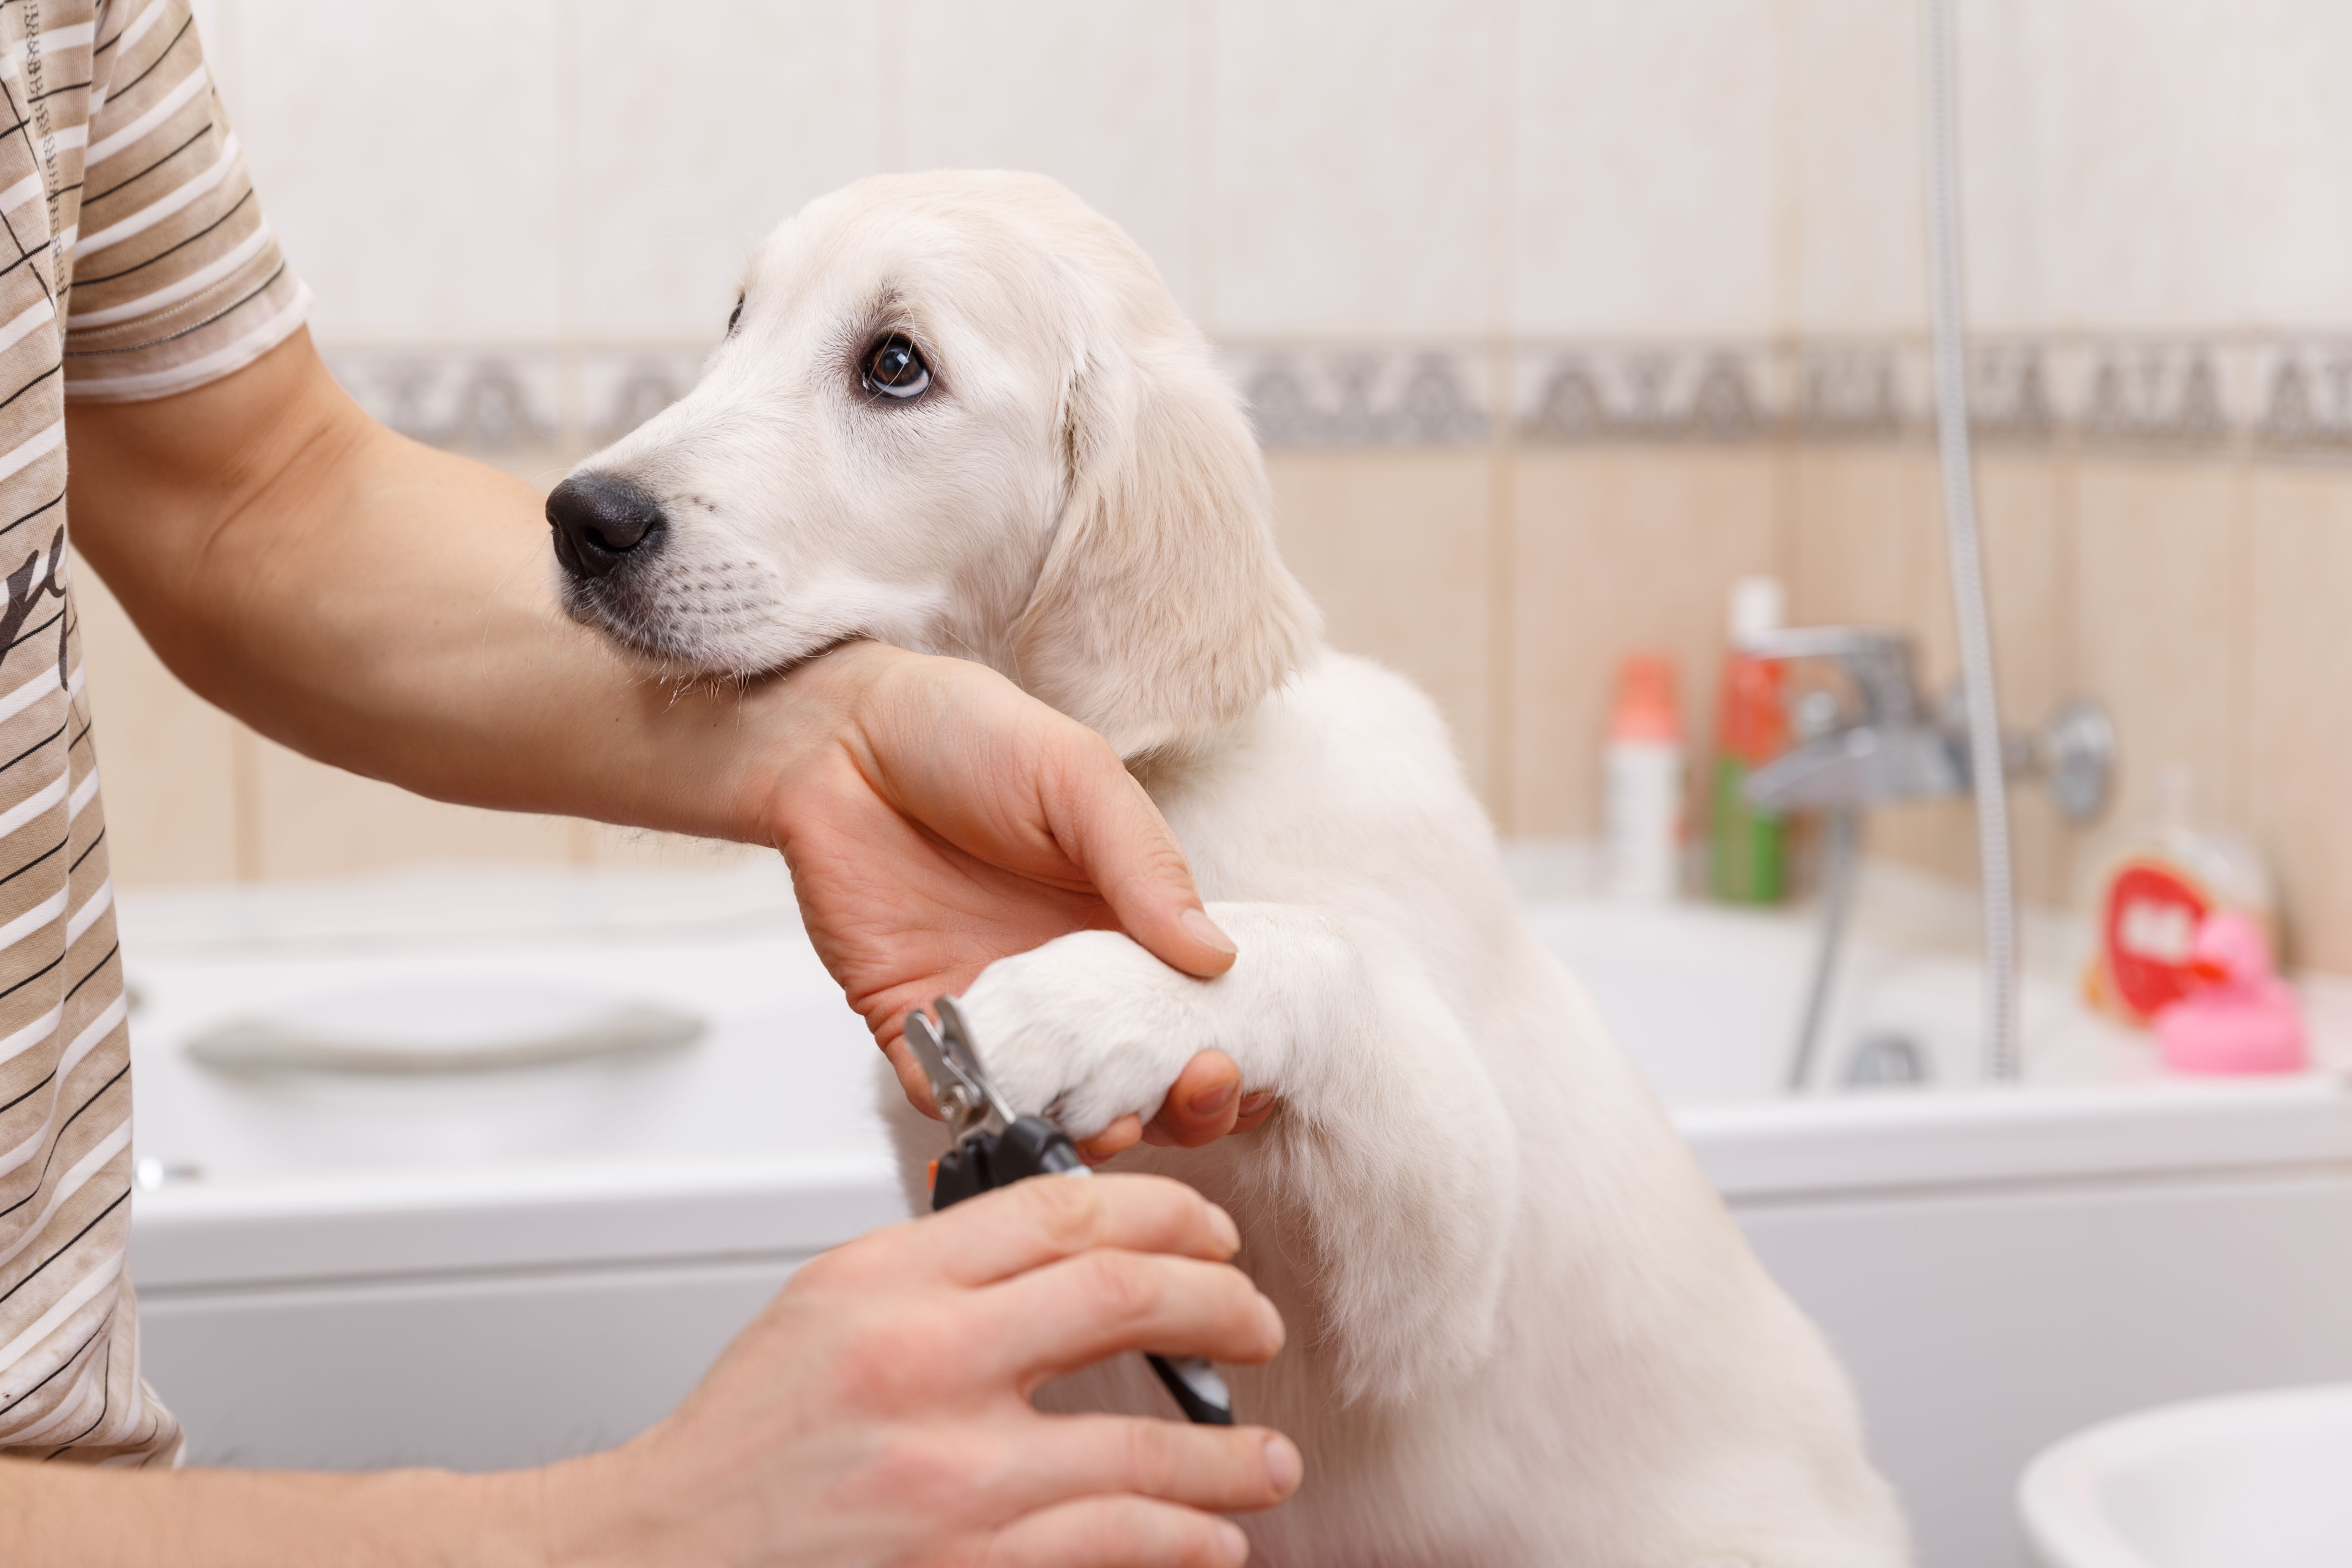 How To Groom A Dog: 5 Expert Tips For Grooming Your Dog At Home